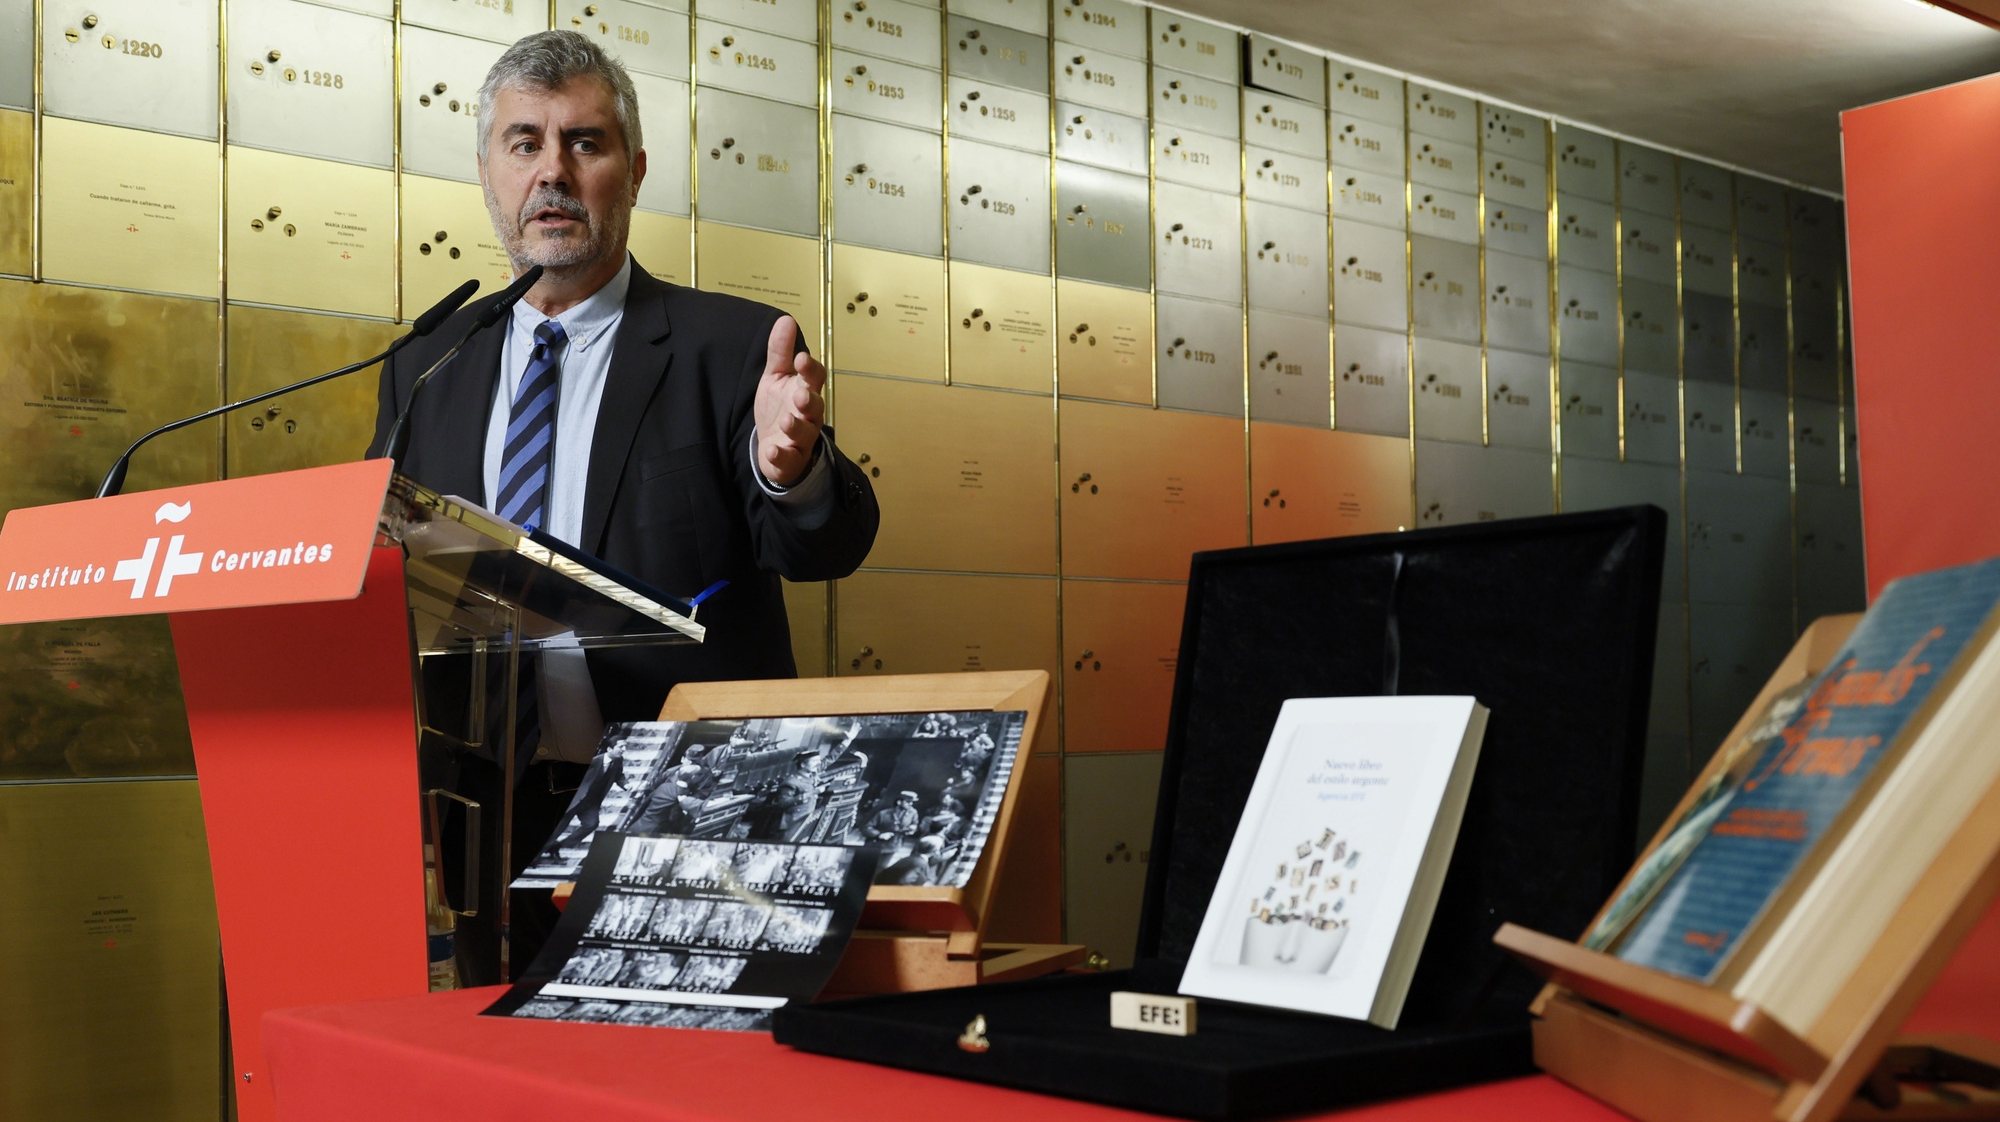 epa11113912 Agencia EFE news agency&#039;s Chairman Miguel Angel Oliver delivers a speech next to the items that will be kept, during the handing in of the Agencia EFE&#039;s legacy to Instituto Cervantes in Madrid, Spain, 30 January 2024. The EFE&#039;s legacy will be kept at one of the safe deposits of The Box of Letters of Instituto Cervantes. Oliver handed in a copy of Agency&#039;s style book, an anthology of famous authors and some photos taken by EFE during the failed coup d&#039;etat attempt in Spain in 1981. The event is held in the framework of the 85th anniversary of foundation of Agencia EFE.  EPA/BALLESTEROS